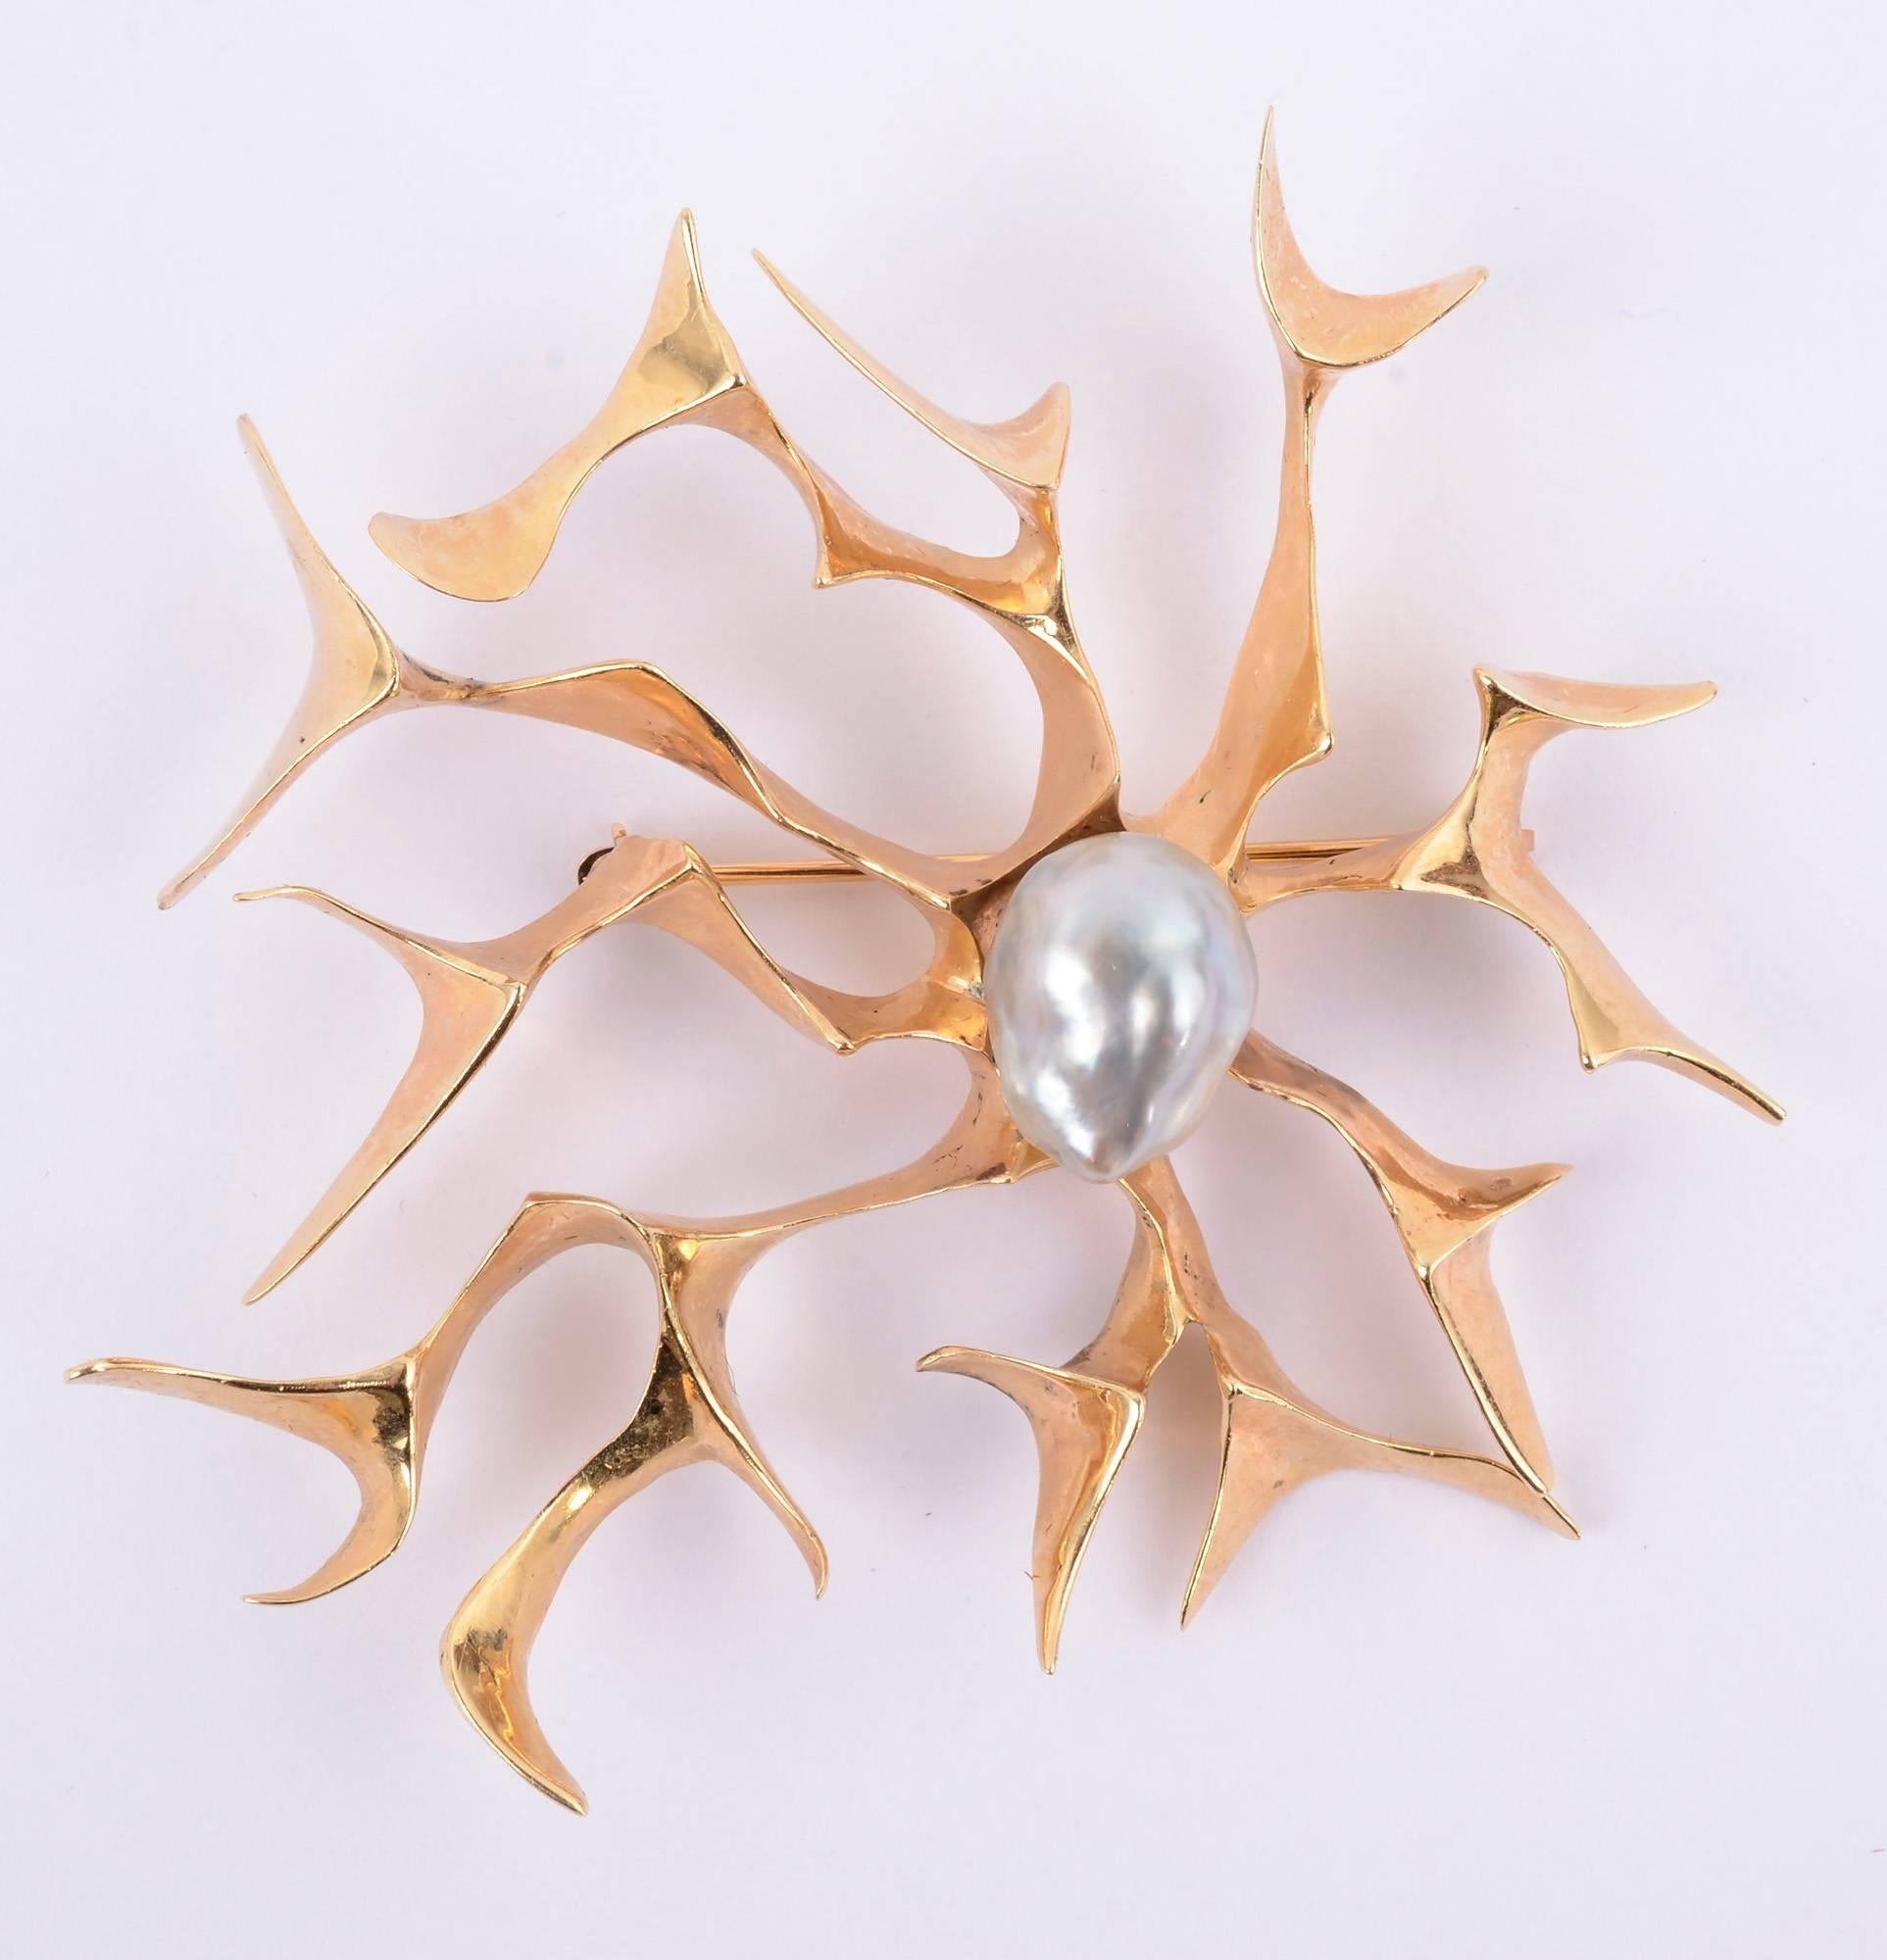 Freeform brooch and matching earrings by late  modernist designer, Ronald Pearson. Pearson was one of America's most highly esteemed art jewelry makers of the mid-20th century. 
The 14 karat brooch and earrings are open and airy. The brooch measures